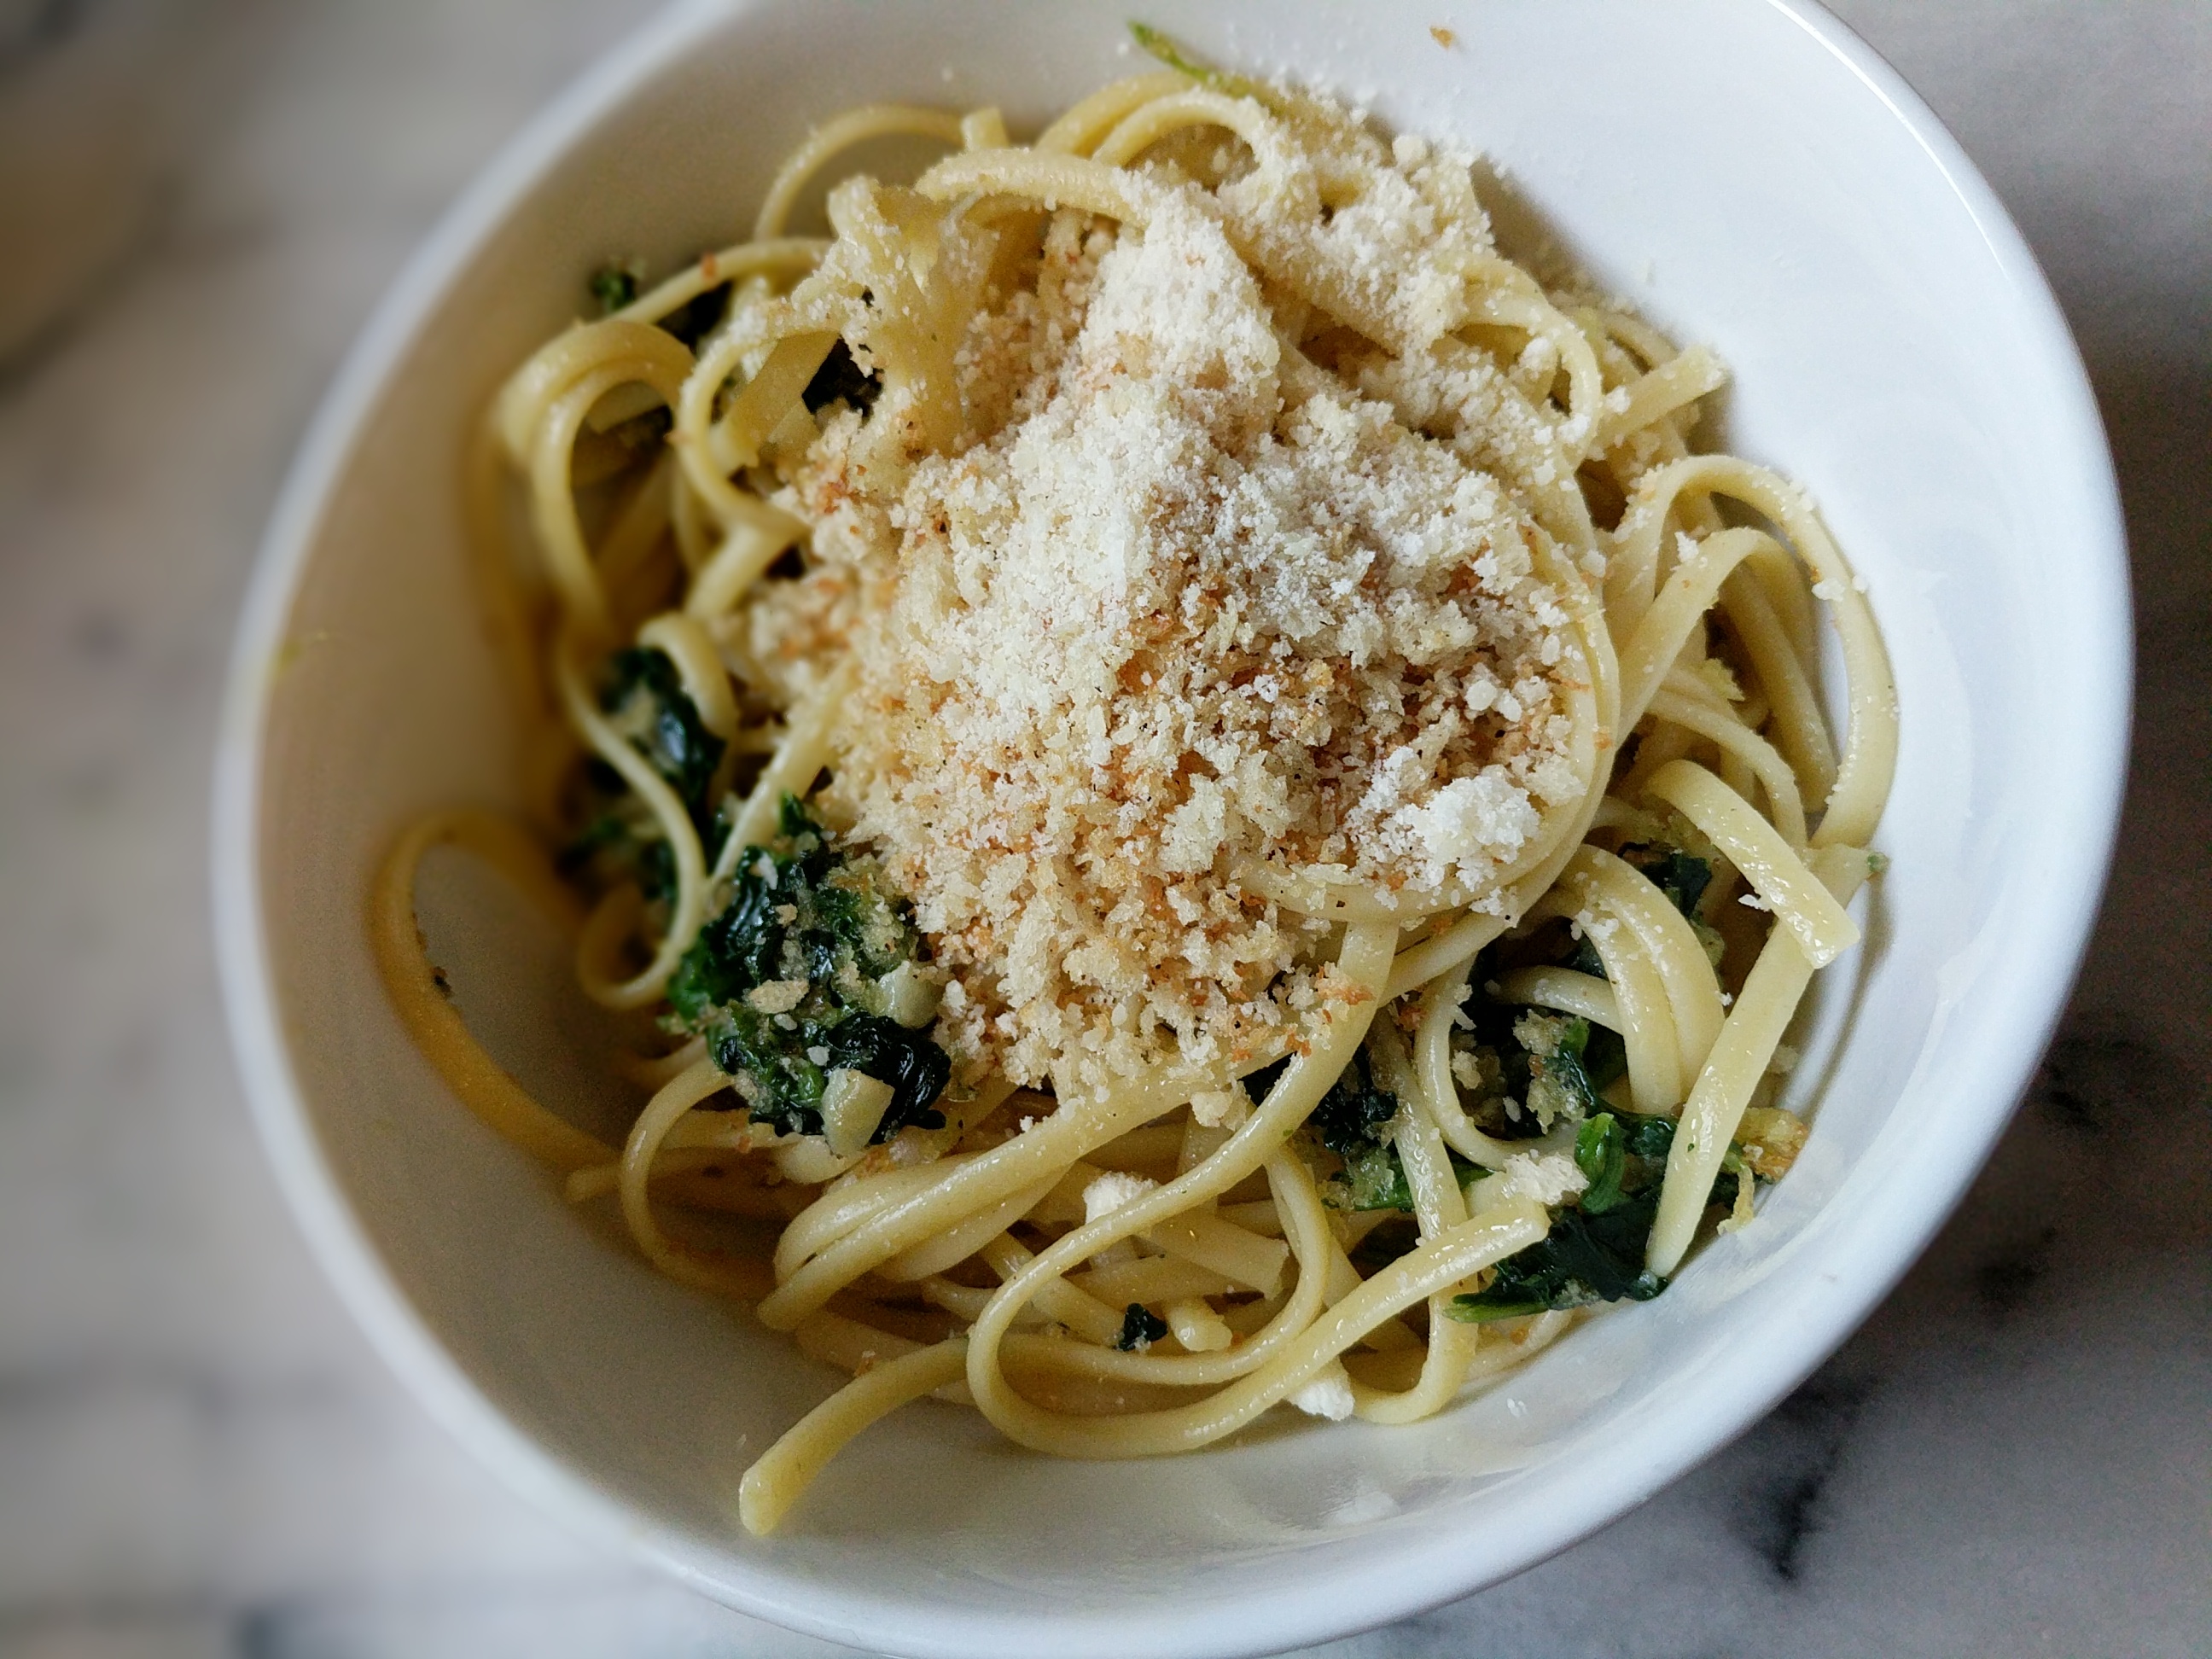 Linguini with spinach, parmesan cheese, and bread cumbs. A prepared dinner in a white bowl.